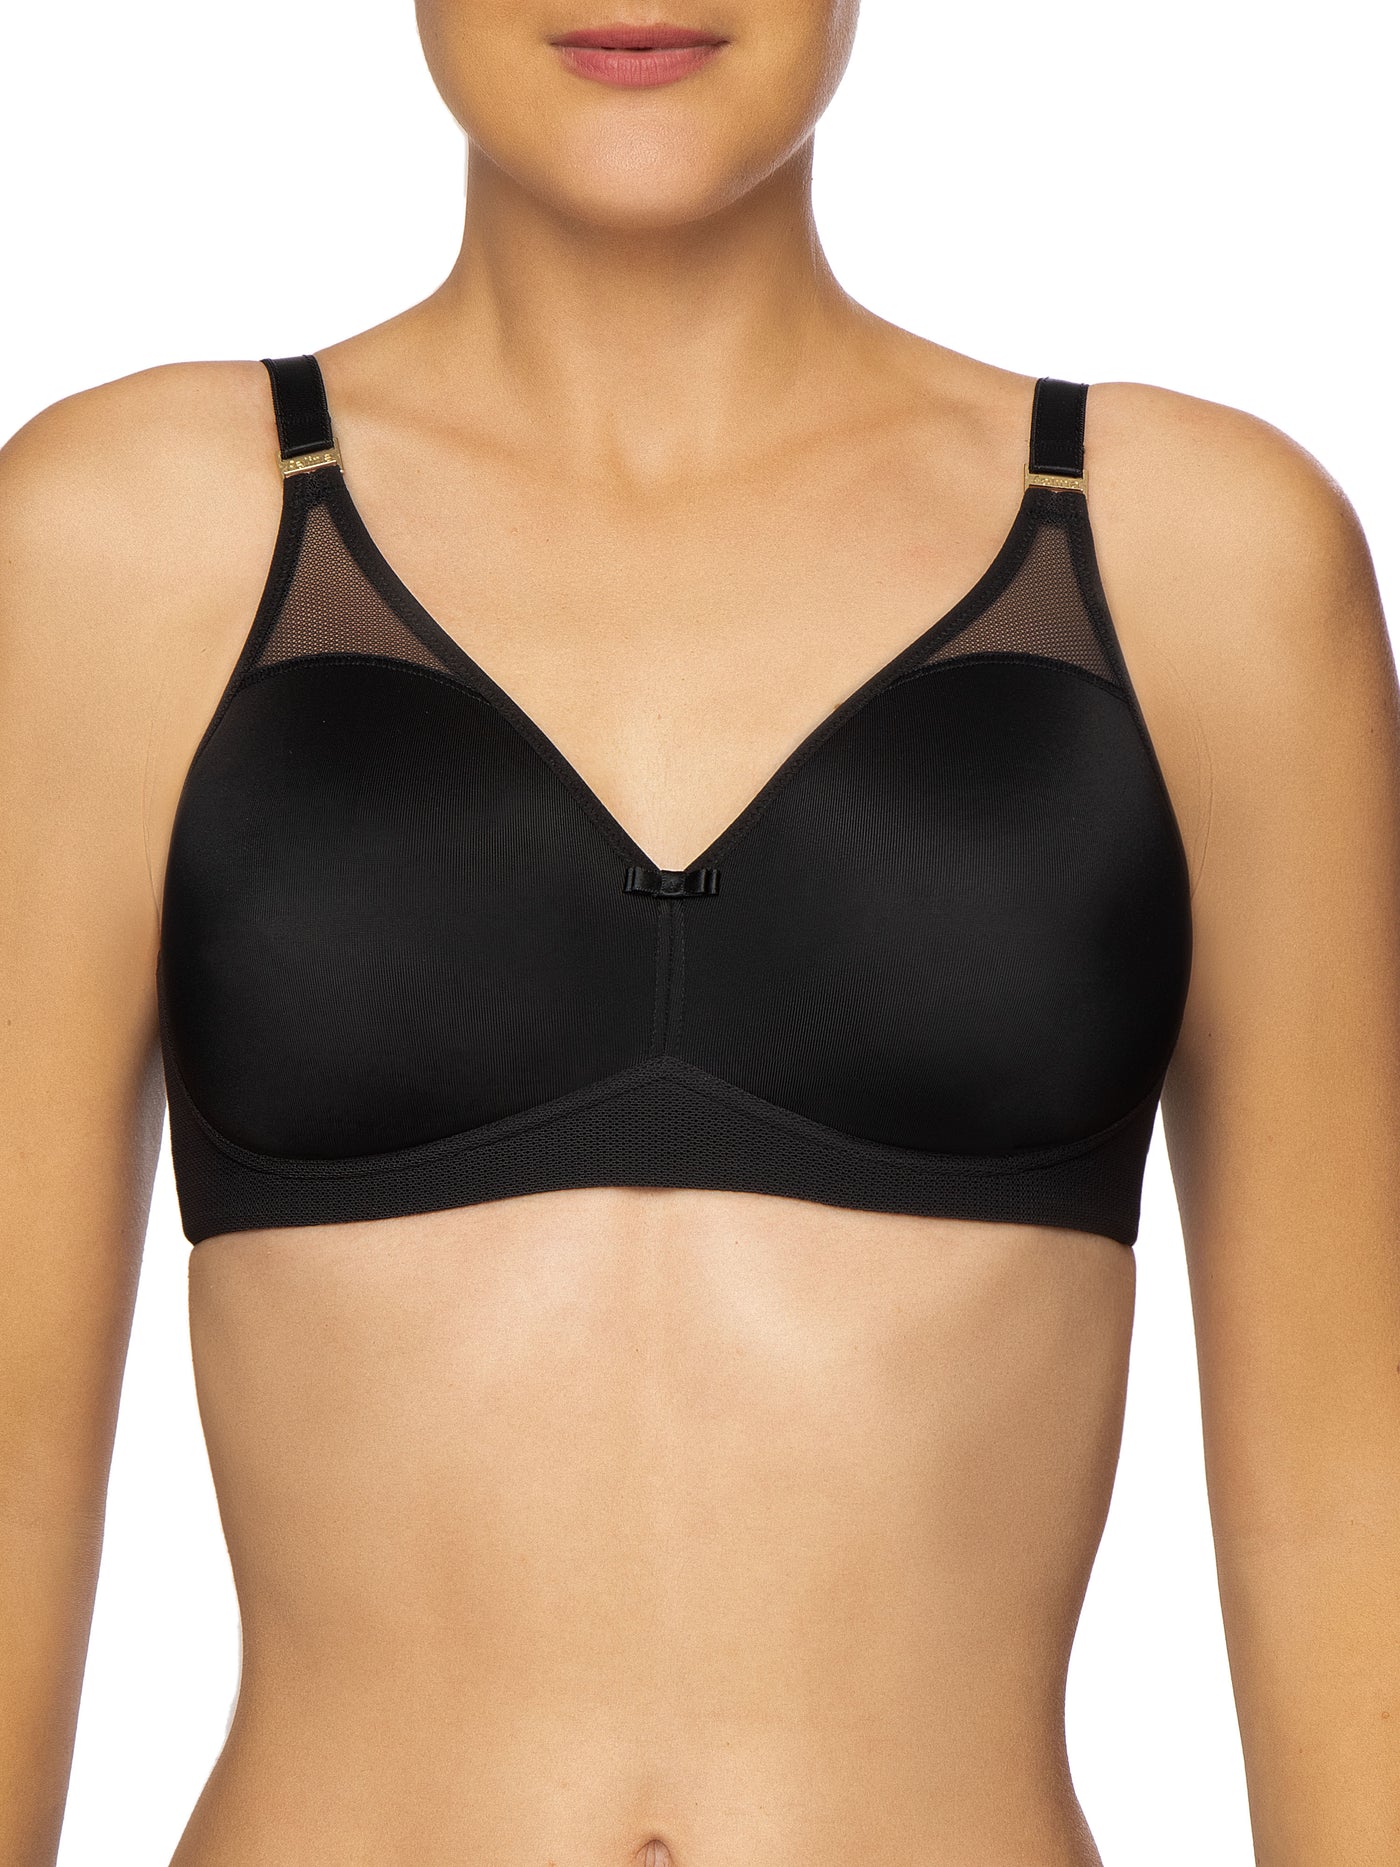 Mastectomy Bra Unwired Underwear Soft Touch For Women With Breast